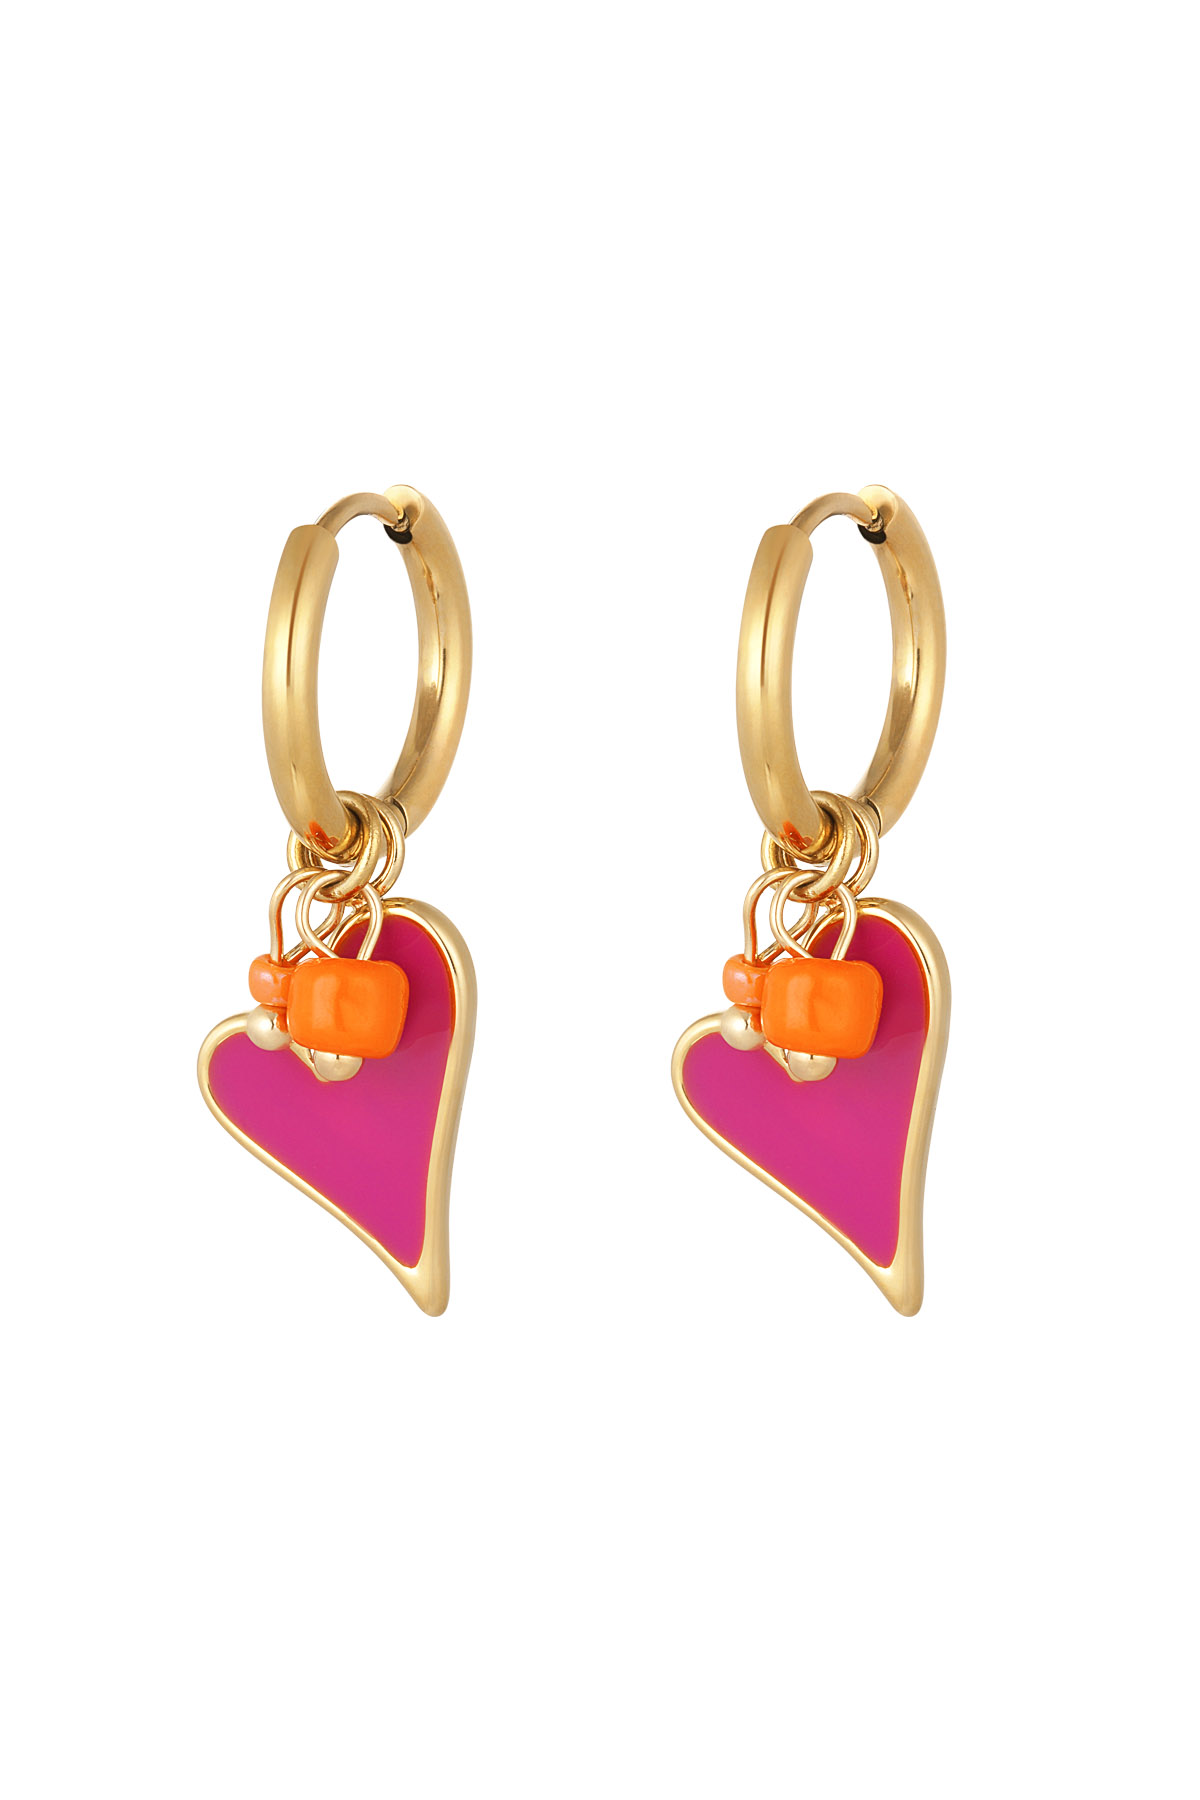 Earring heart with beads pink - gold